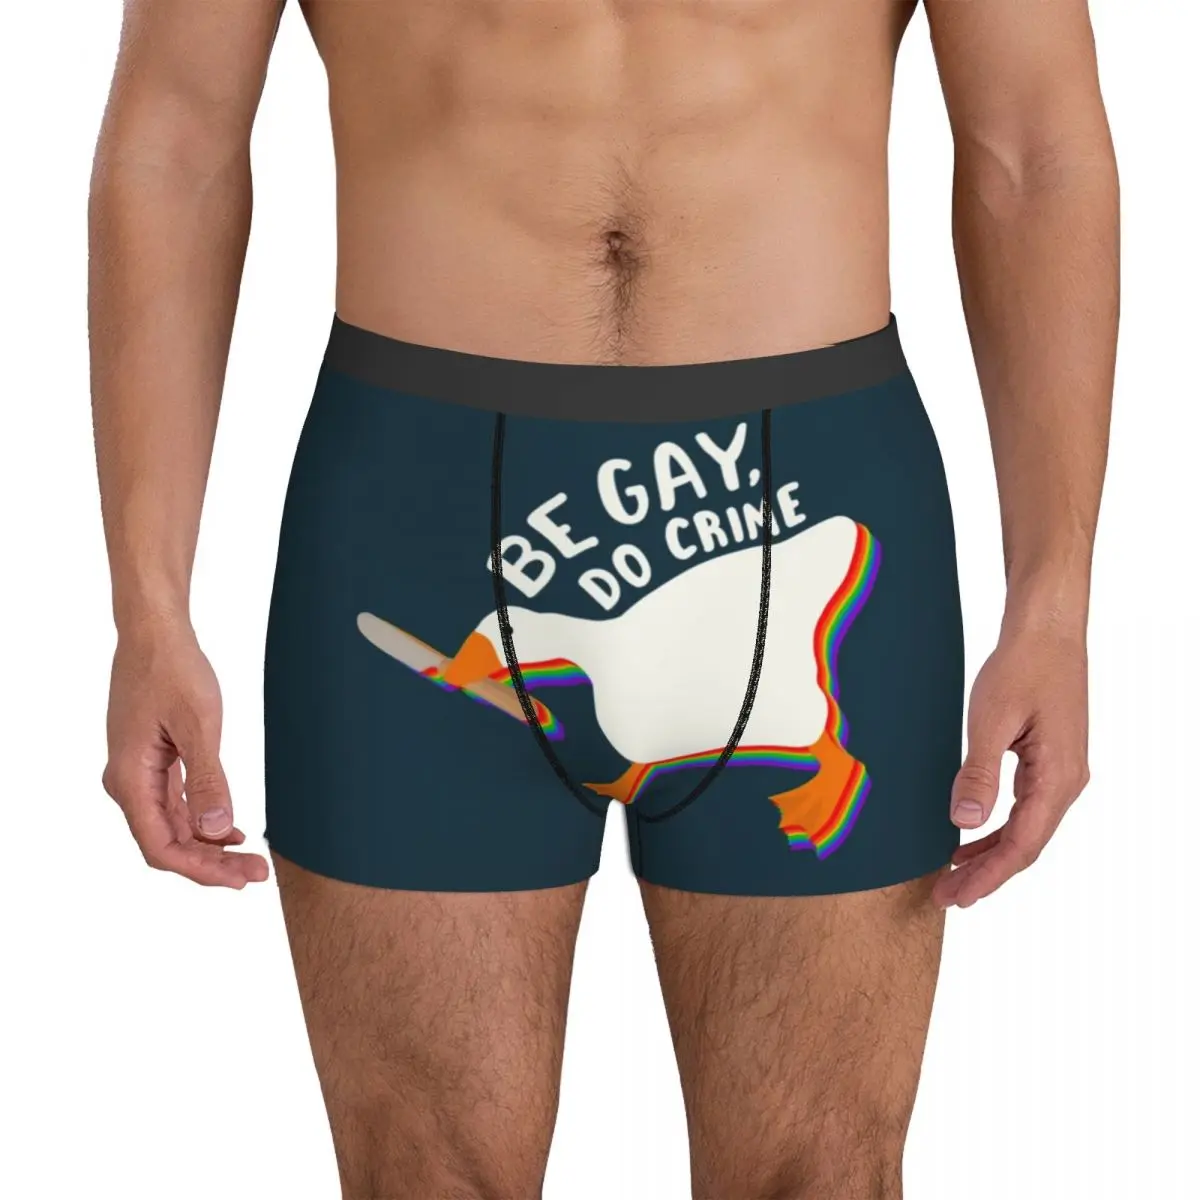 

Be Gay Do Crime Untitled Goose Underwear lgbtq lgbt lesbian true crime 3D Pouch High Quality Boxer Shorts Print Boxer Brief Man